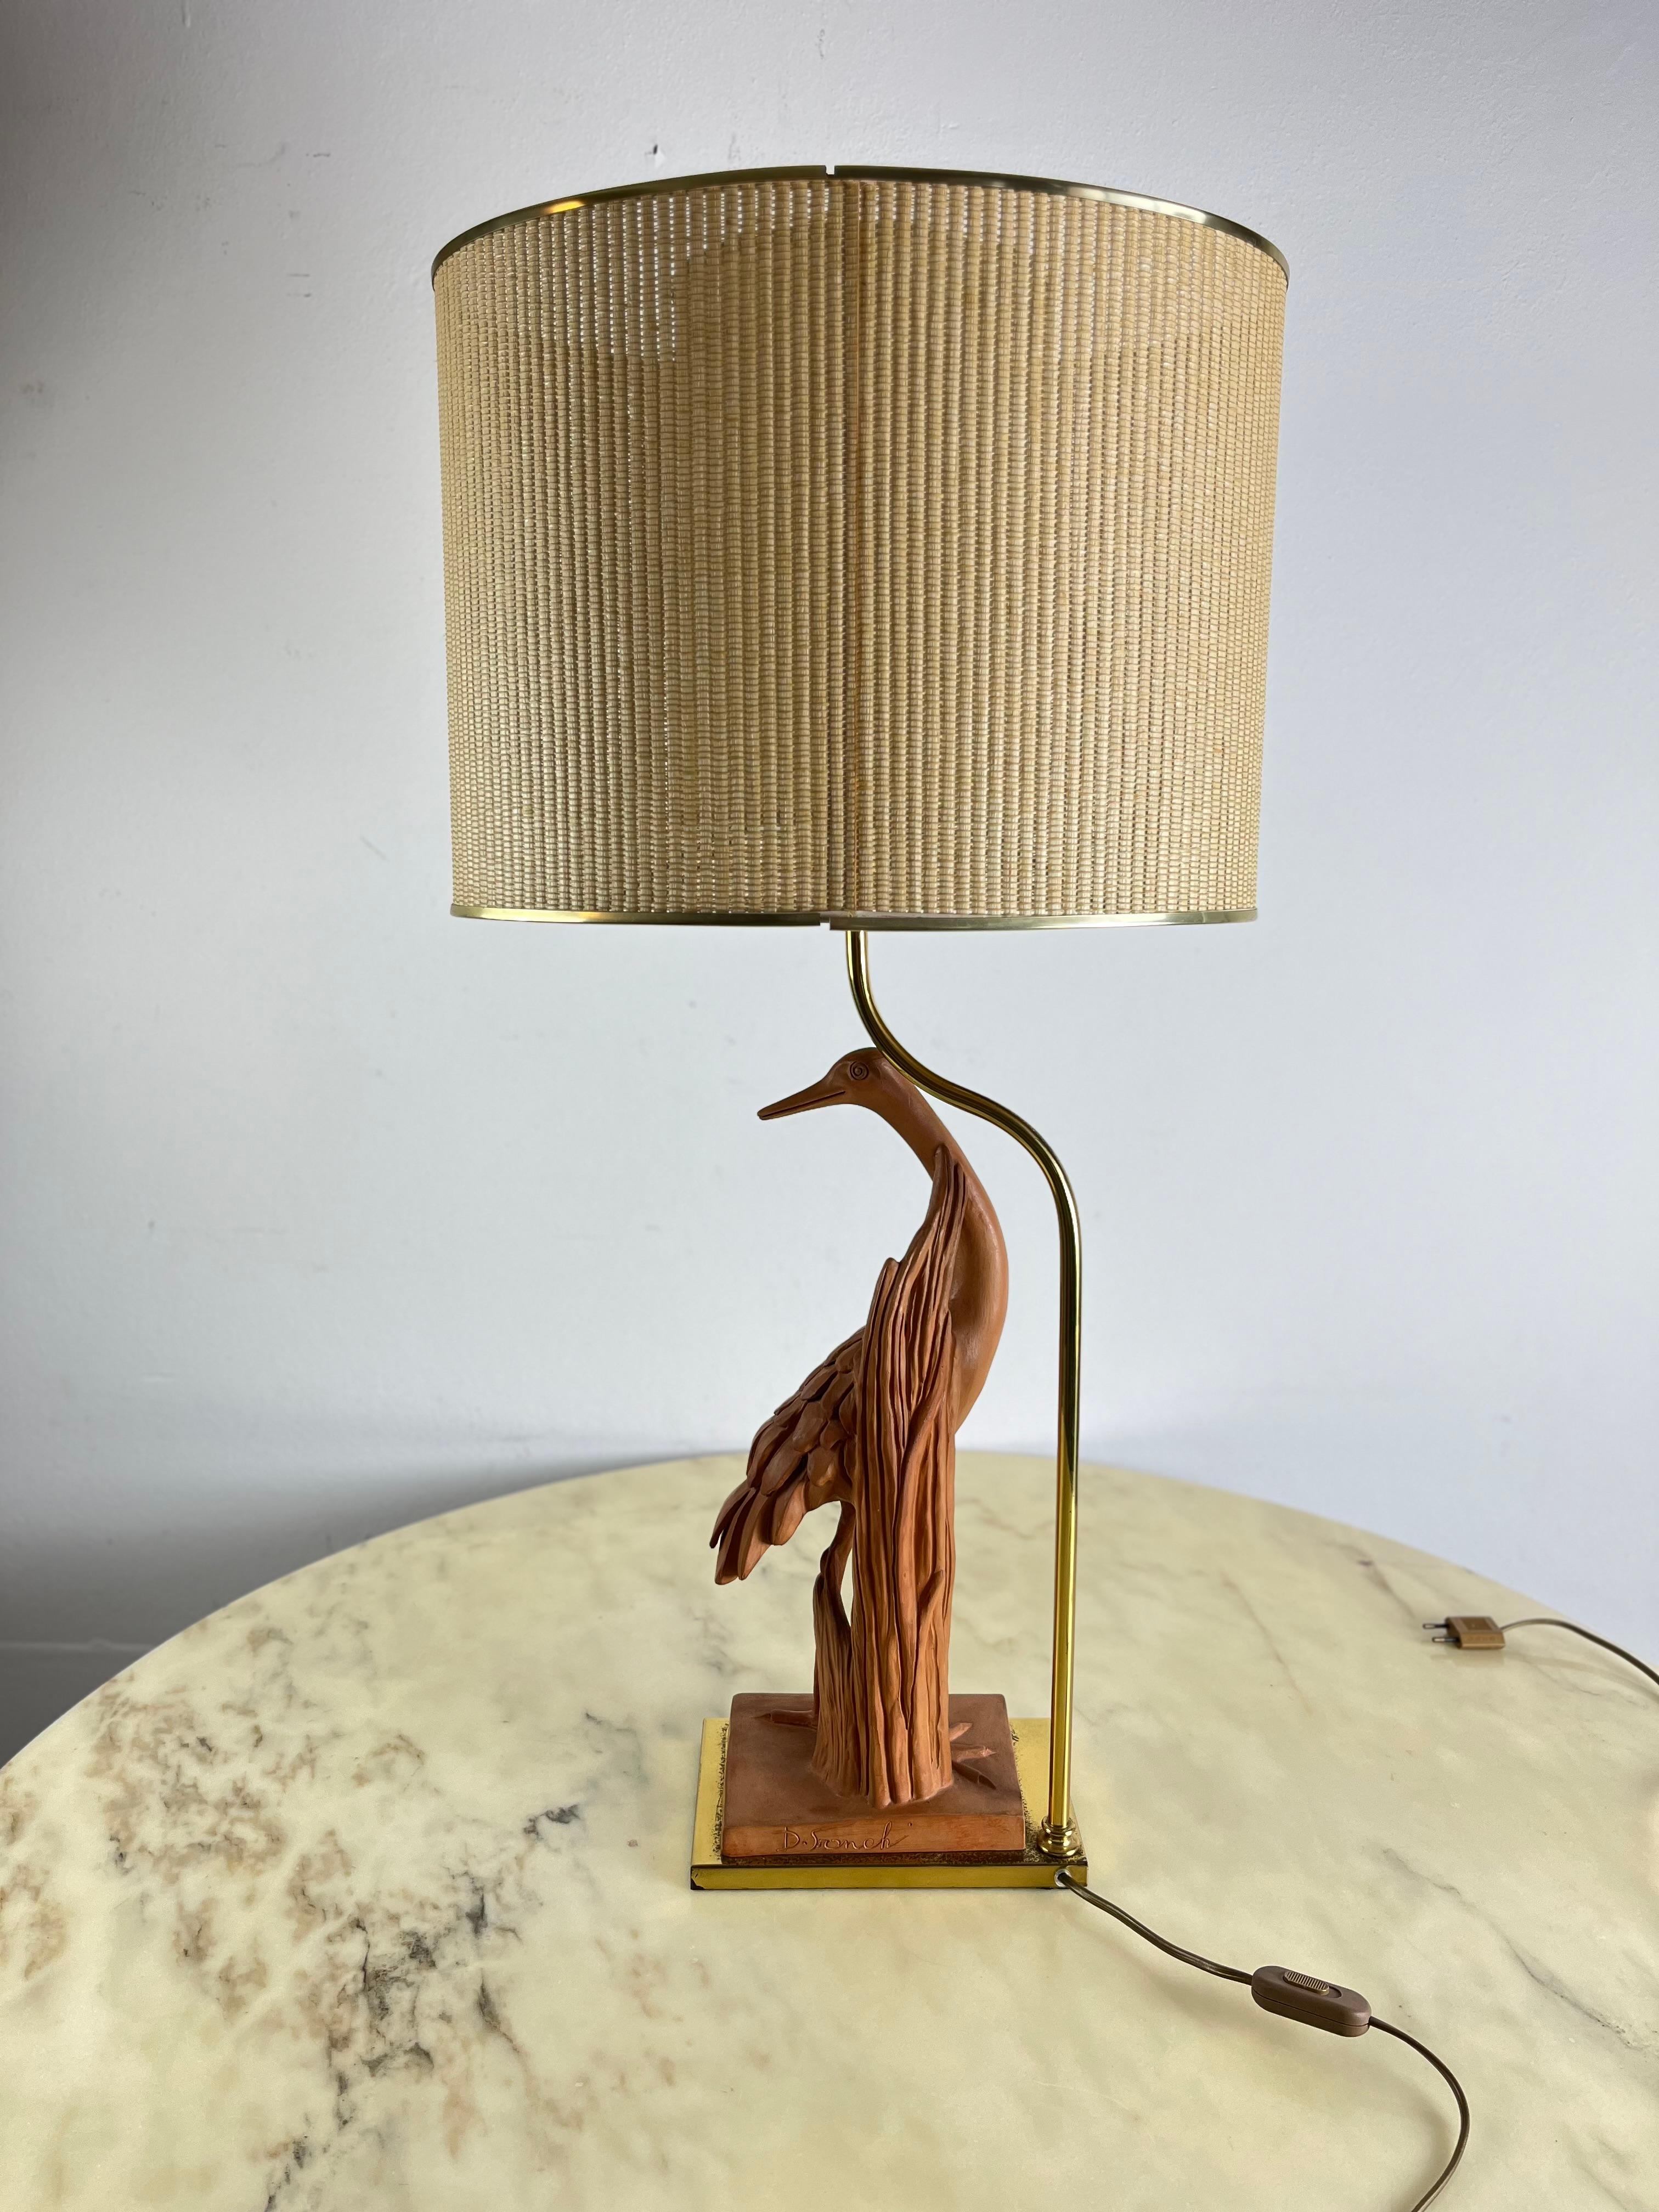 Mid-Century terracotta and brass table lamp, Italian design 1960s
Intact and working, E27 lamp.
Good condition, small signs of aging.